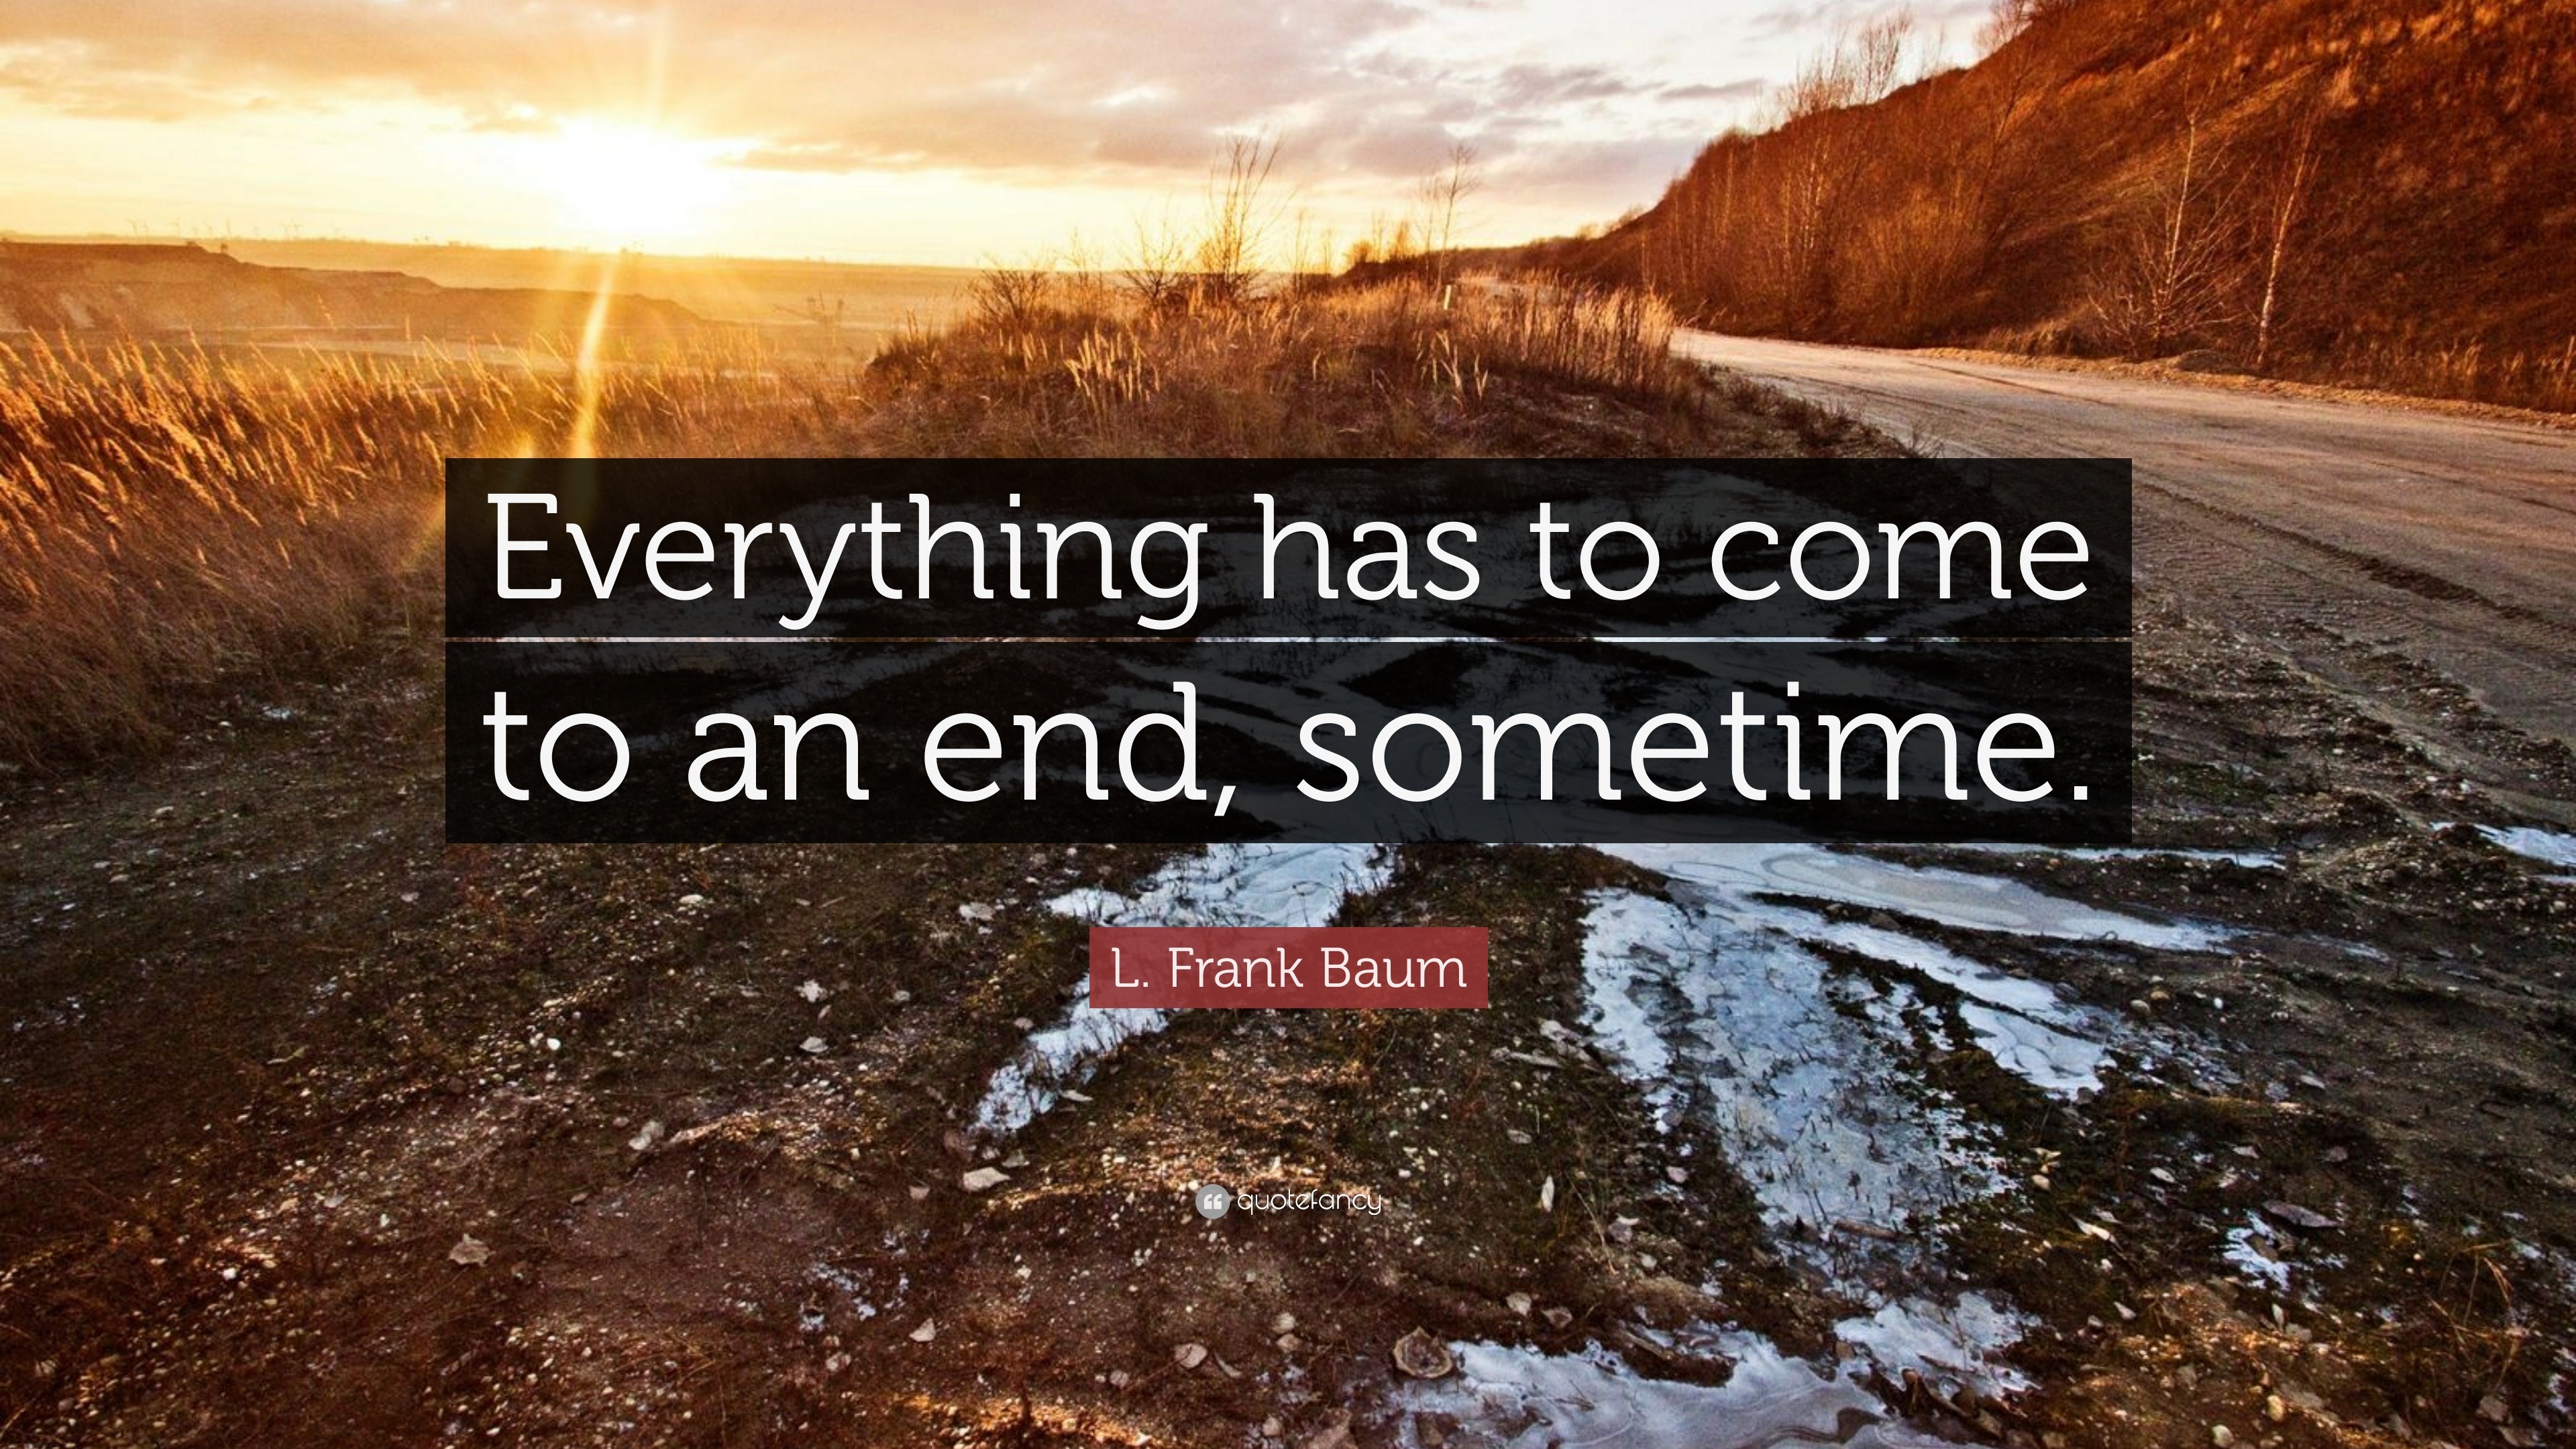 L. Frank Baum Quote “Everything has to come to an end, sometime.”